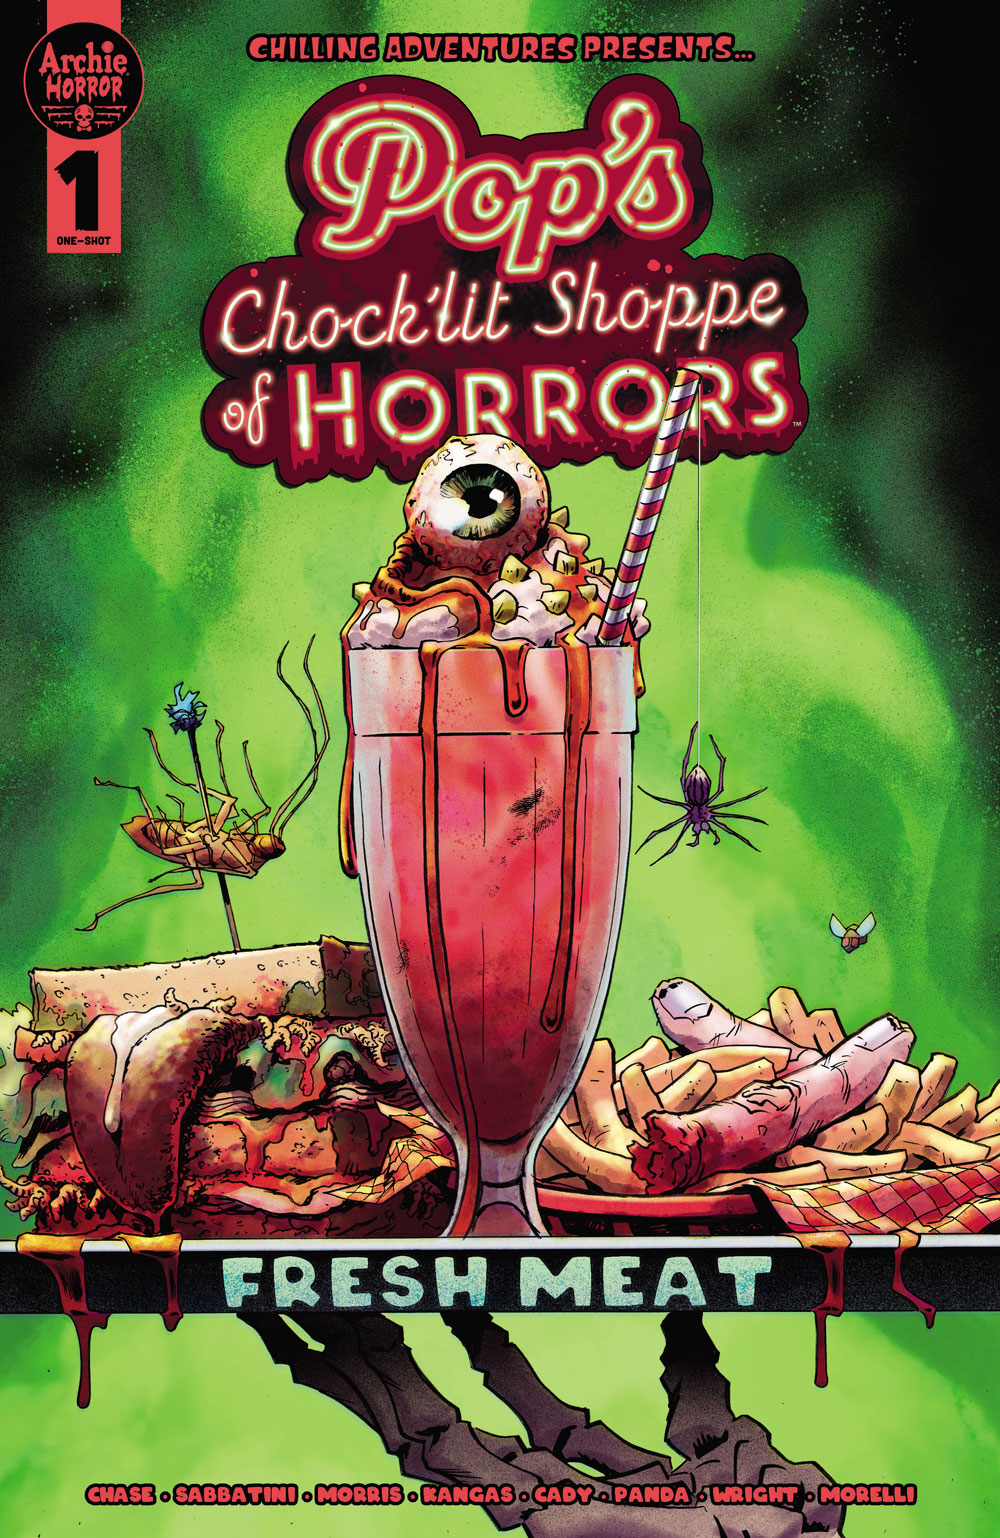 Cover of POP’S CHOCK’LIT SHOPPE OF HORRORS: FRESH MEAT. An array of disgusting food on a diner food, like a milkshake with an eyeball on top, severed fingers in french fries, and lots of insects.